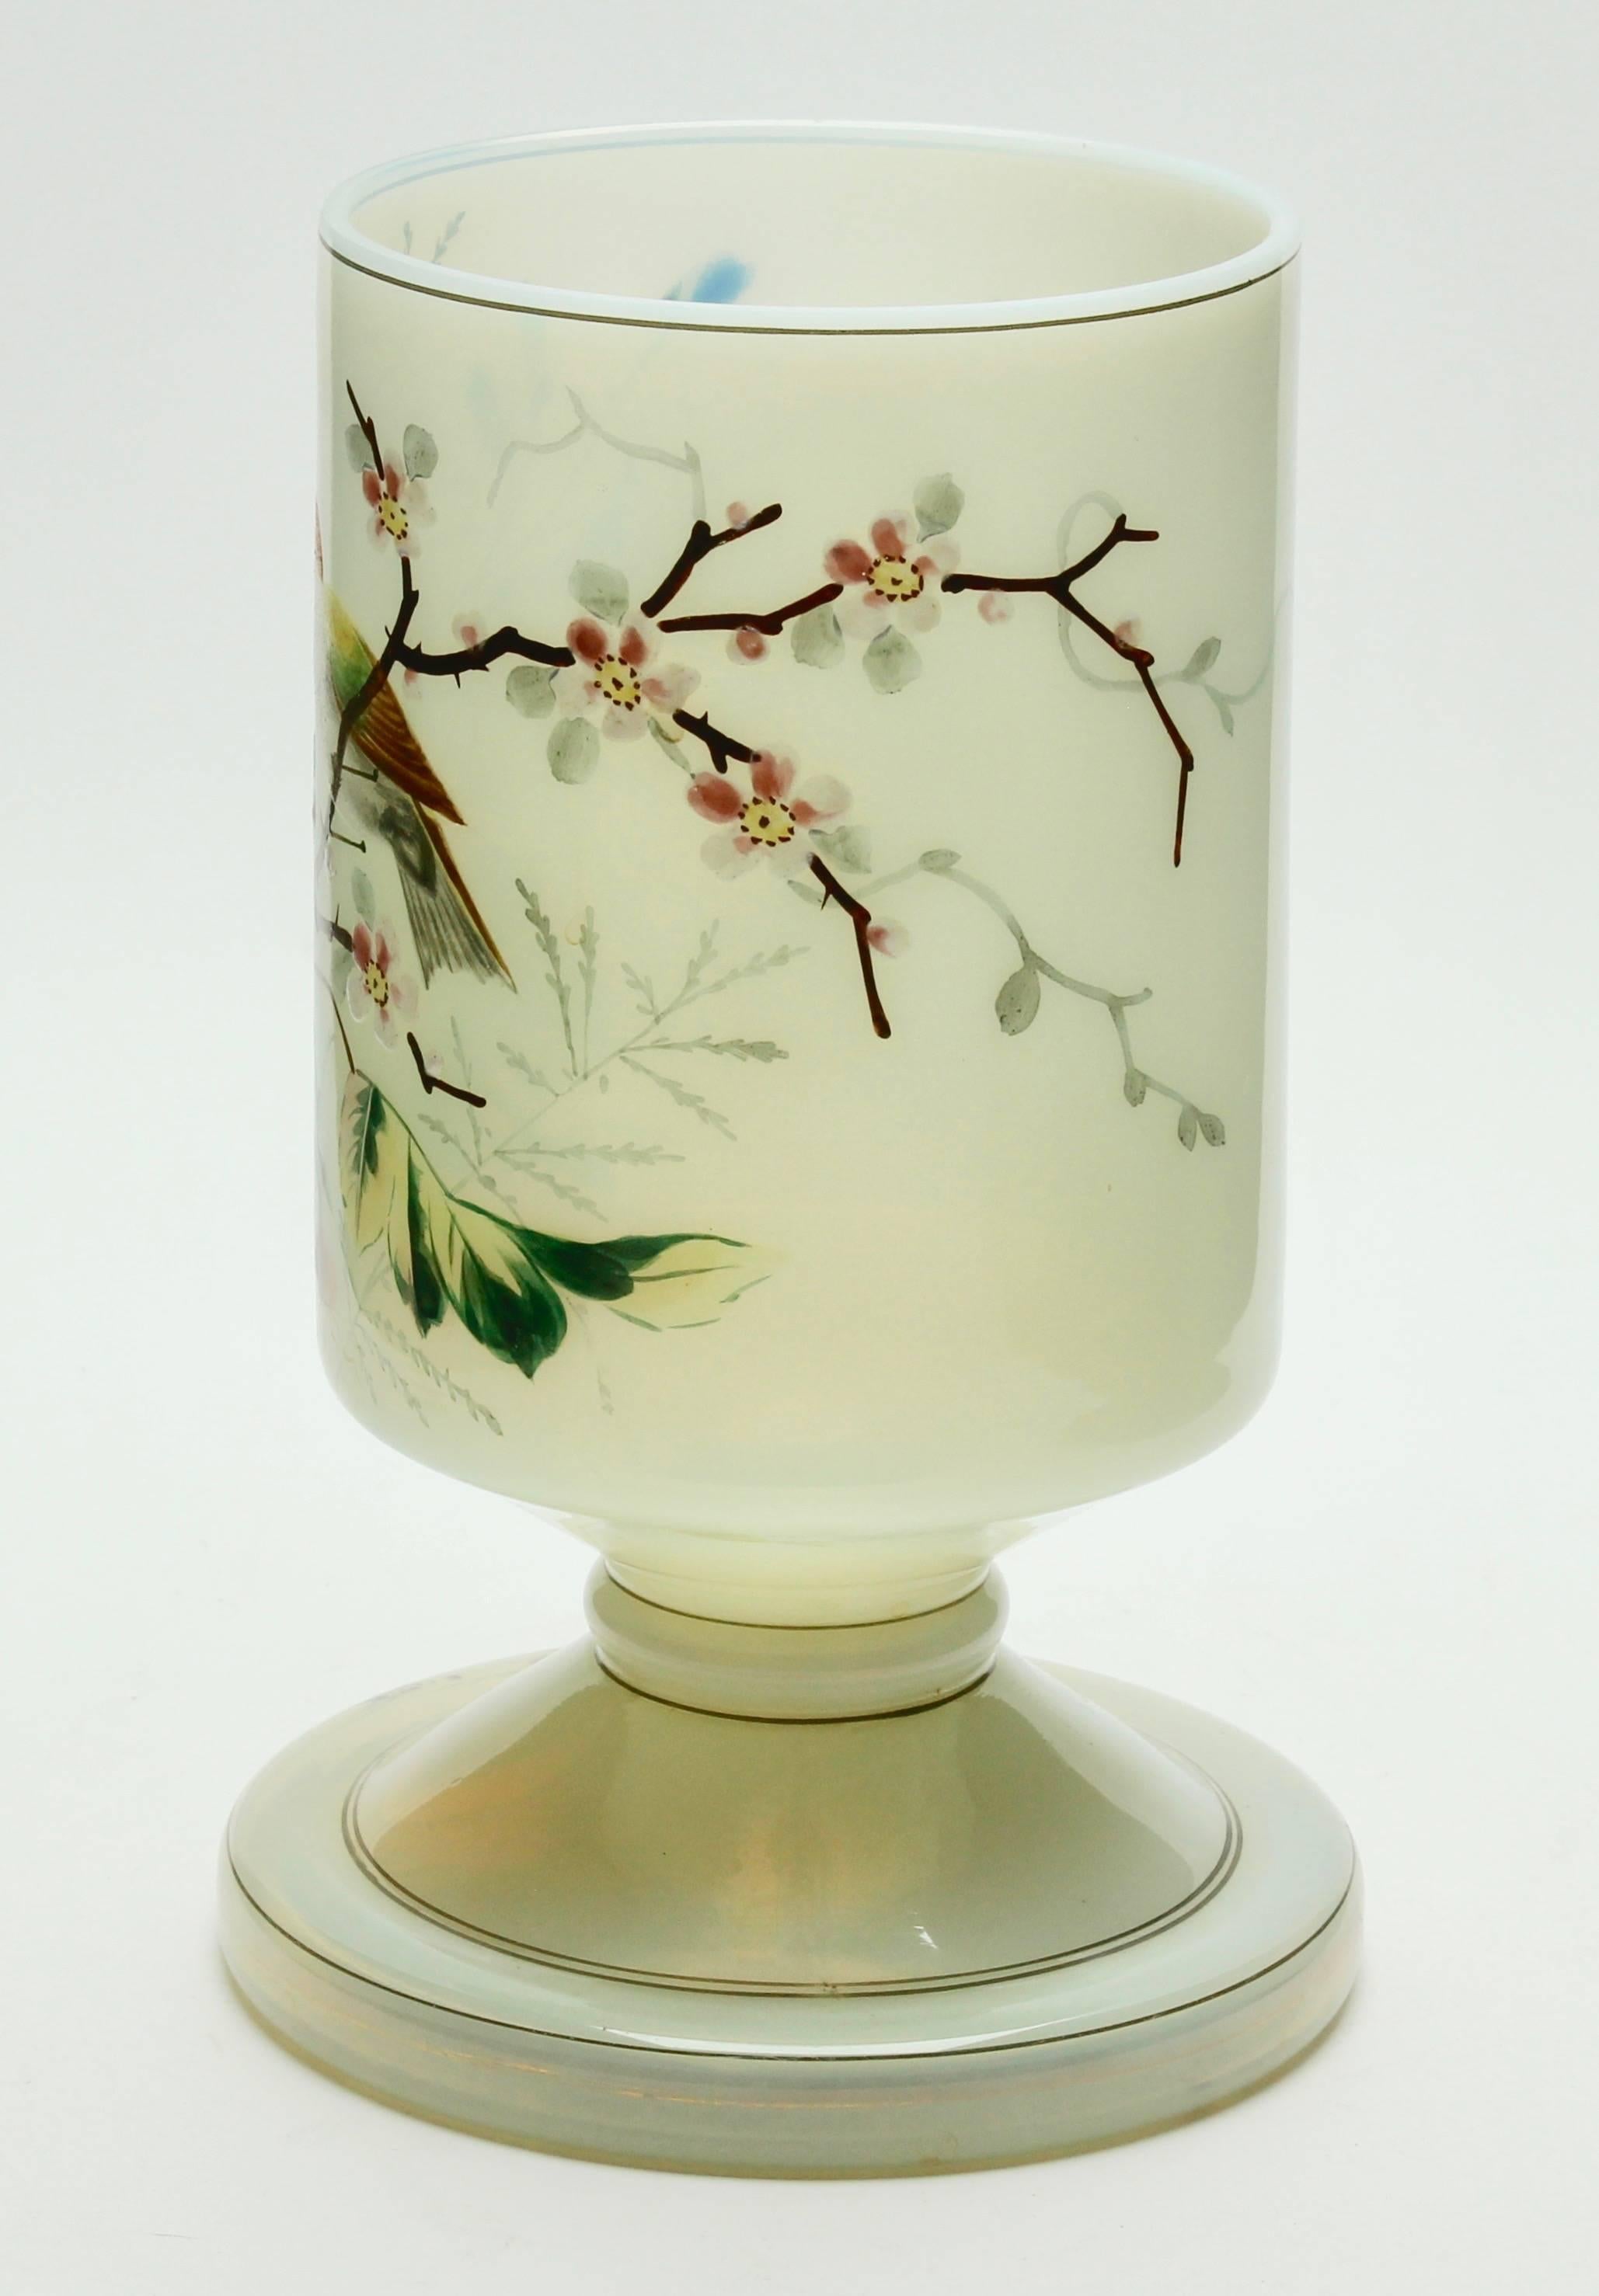 19th century French opaline
Opaline glass is also a decorative style of glass made in France from 1800s-1890s, 
Vase with painted bird and floral decorations.

The piece is in excellent condition and a real